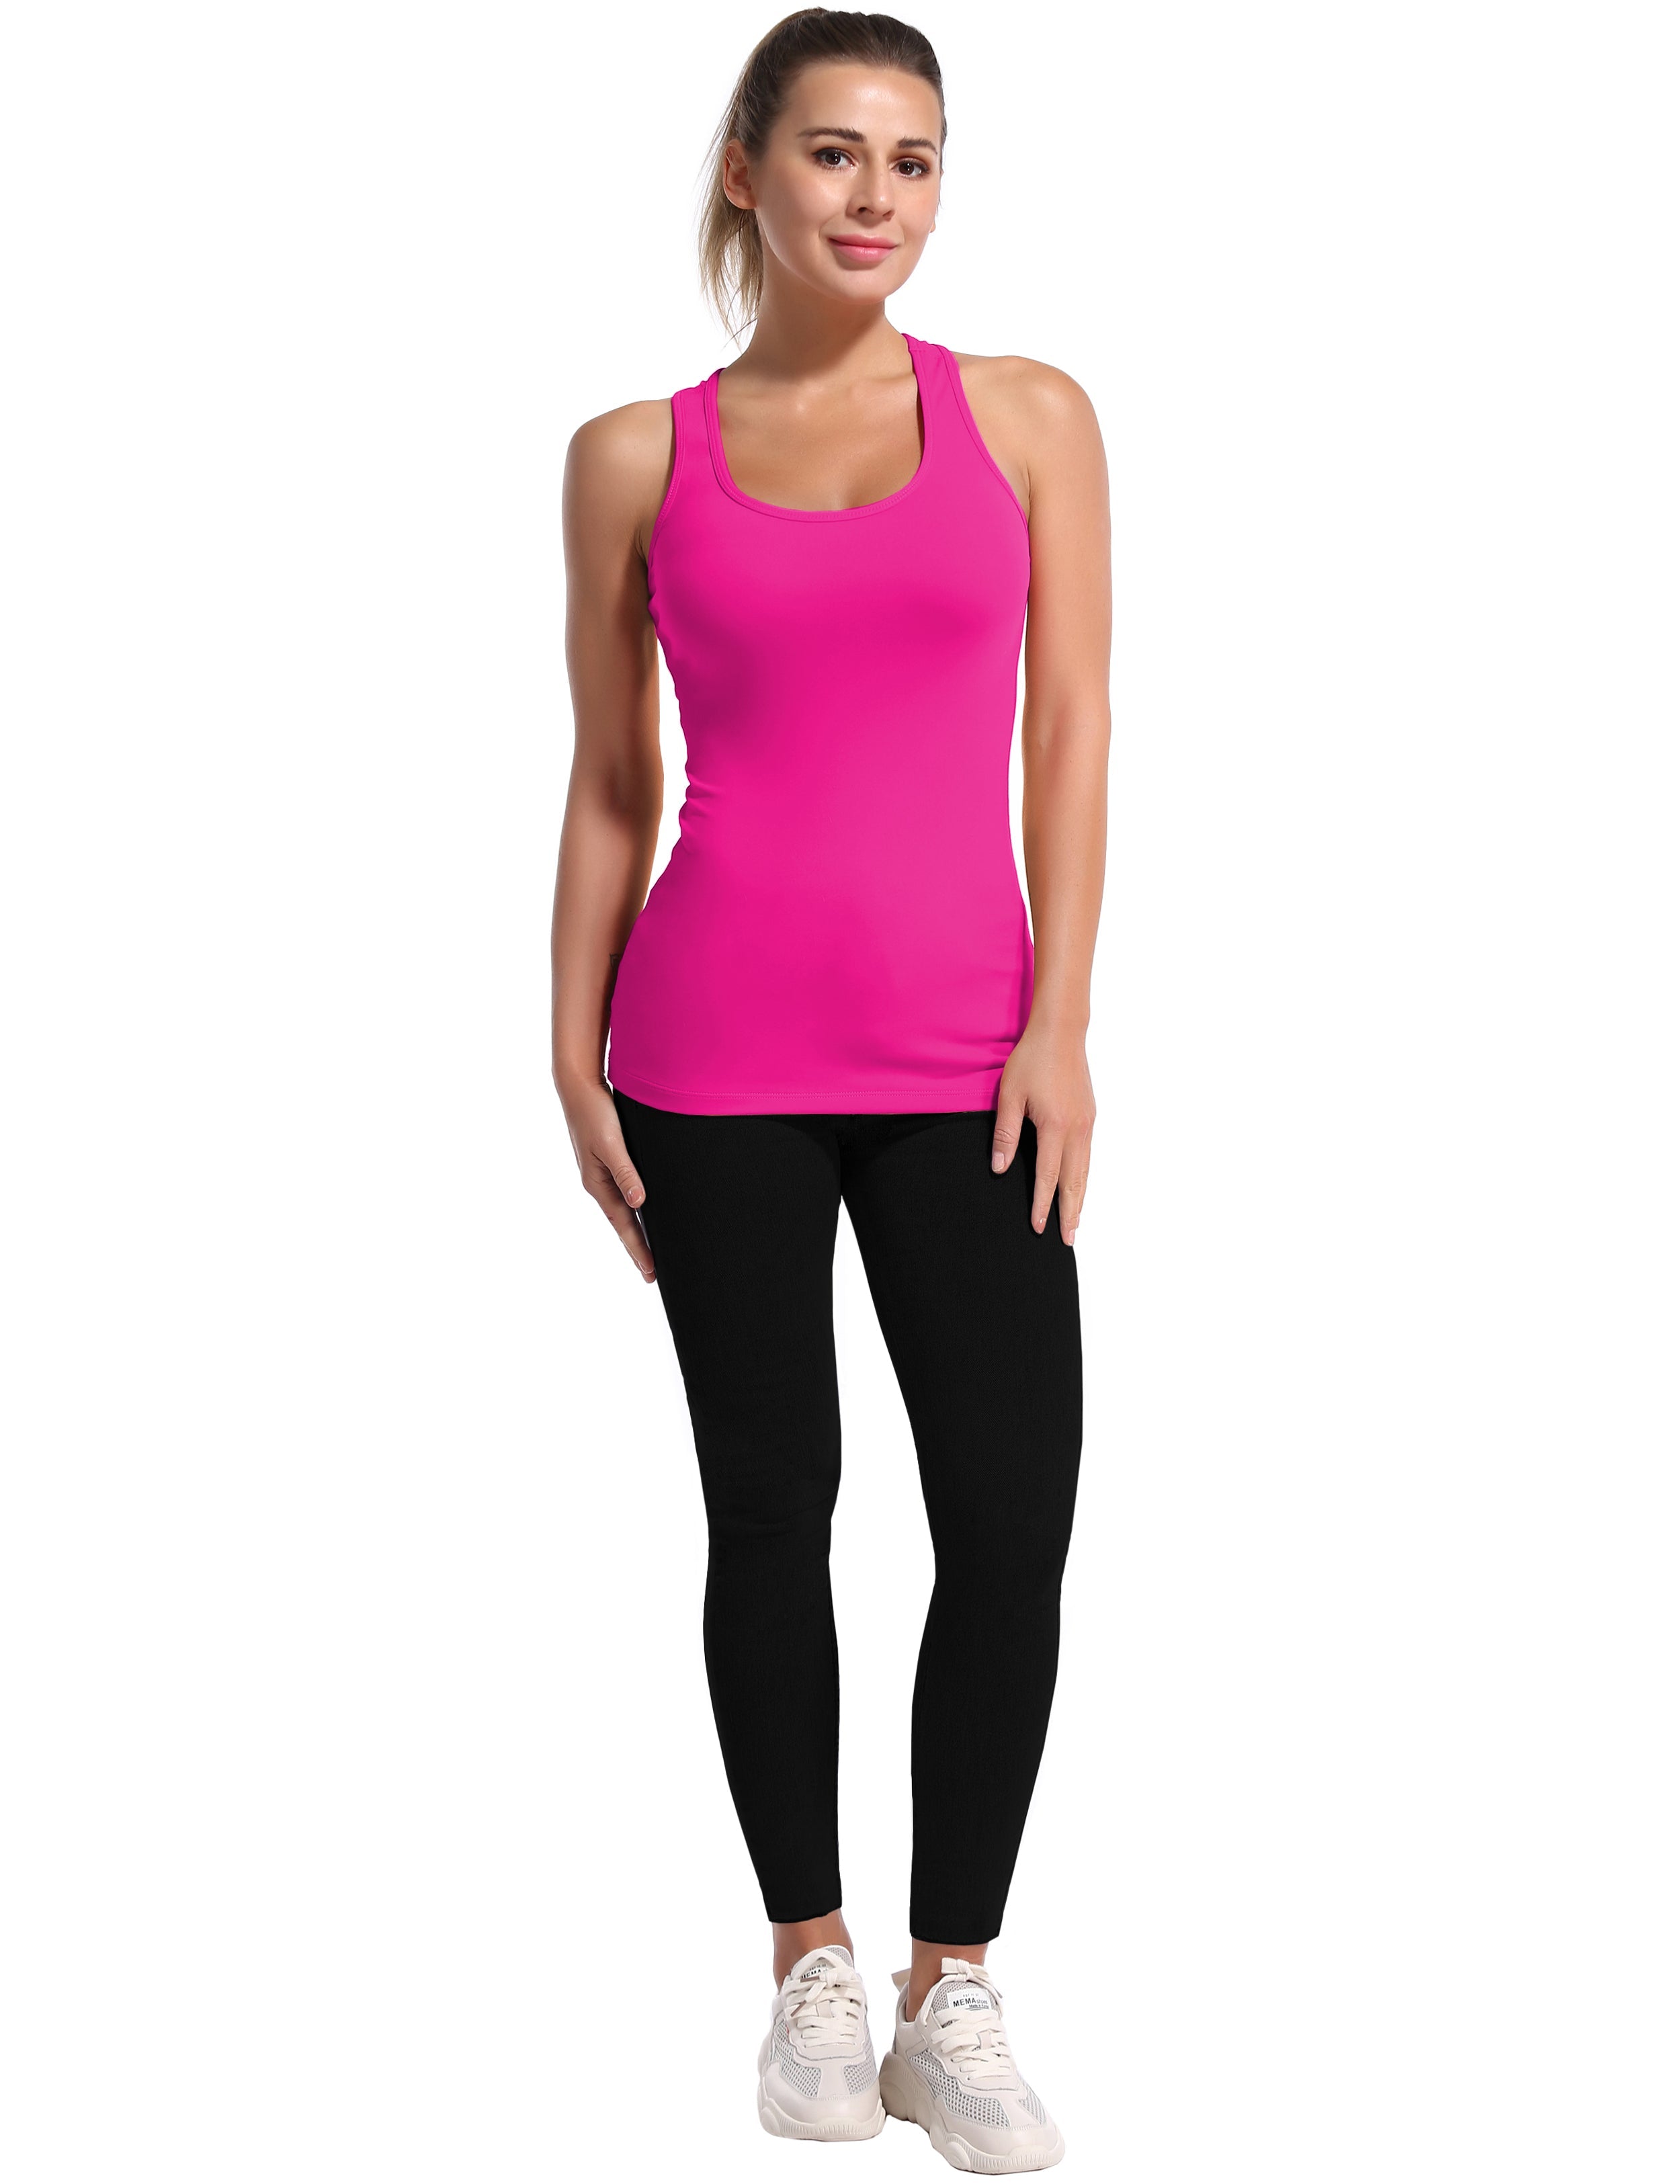 Racerback Athletic Tank Tops magenta 92%Nylon/8%Spandex(Cotton Soft) Designed for Jogging Tight Fit So buttery soft, it feels weightless Sweat-wicking Four-way stretch Breathable Contours your body Sits below the waistband for moderate, everyday coverage